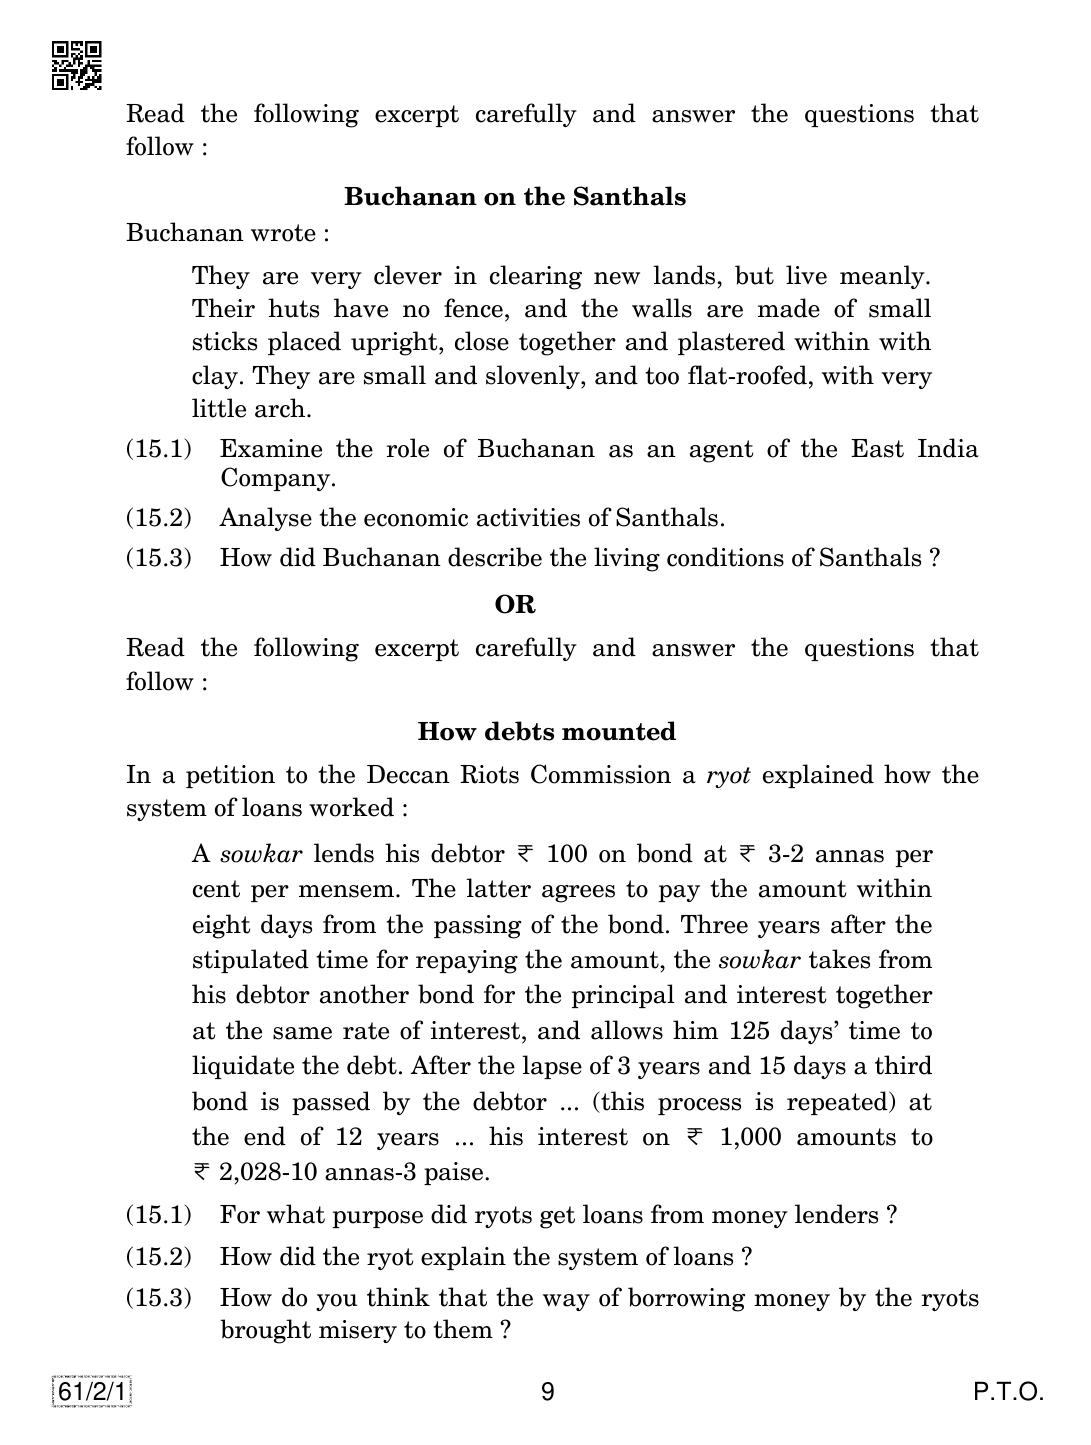 CBSE Class 12 61-2-1 History 2019 Question Paper - Page 9